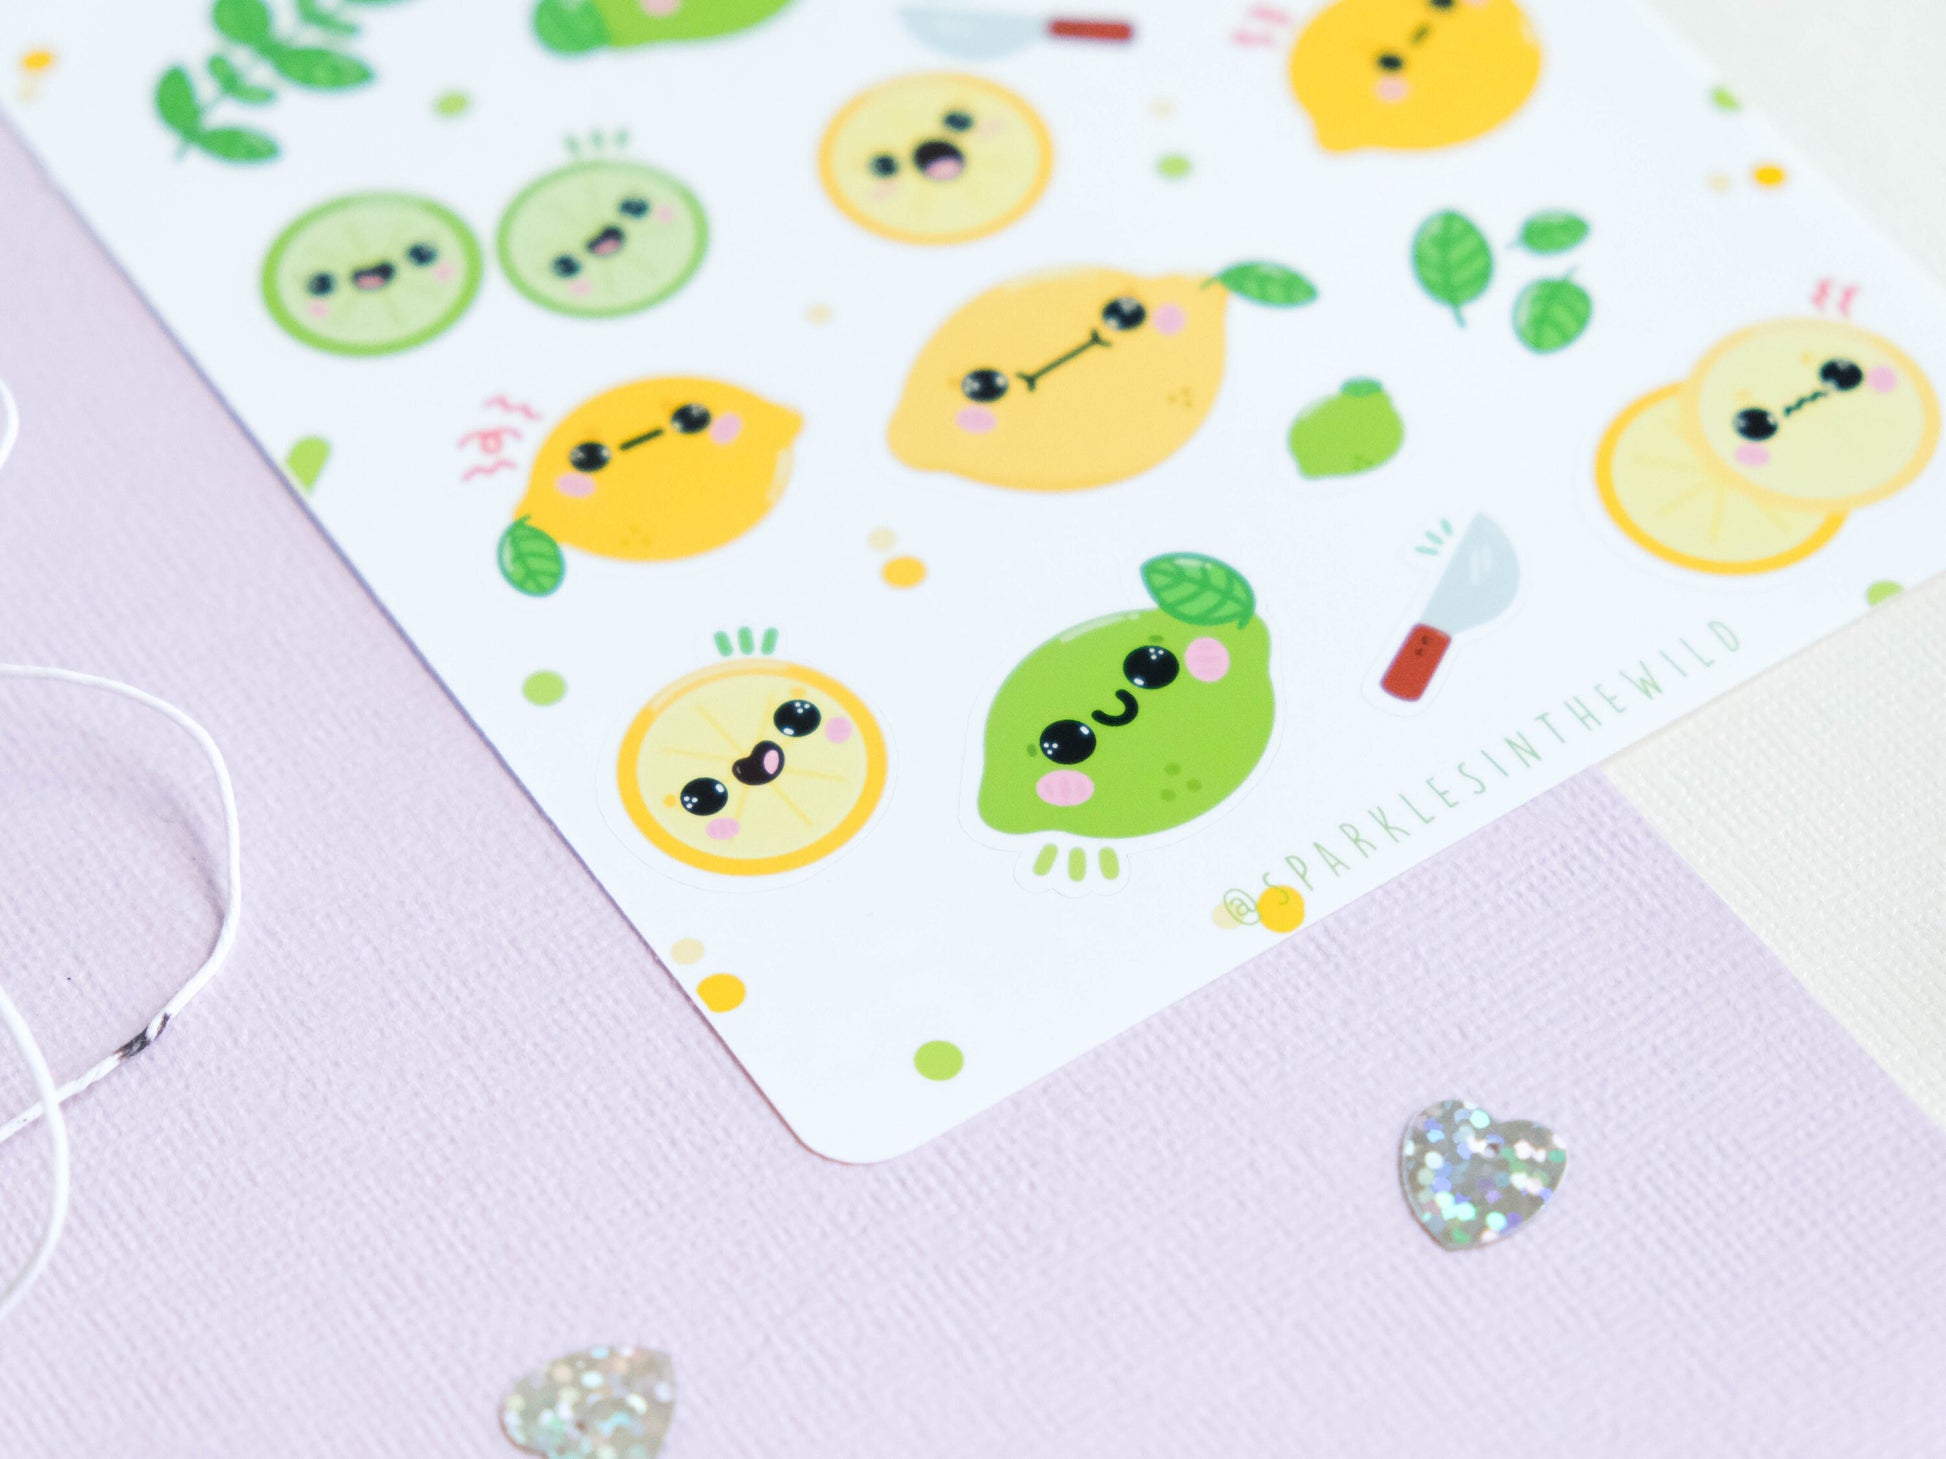 Stickersheet water resistant Lemon and Lime Kawaii to decorate bullet journal and planner